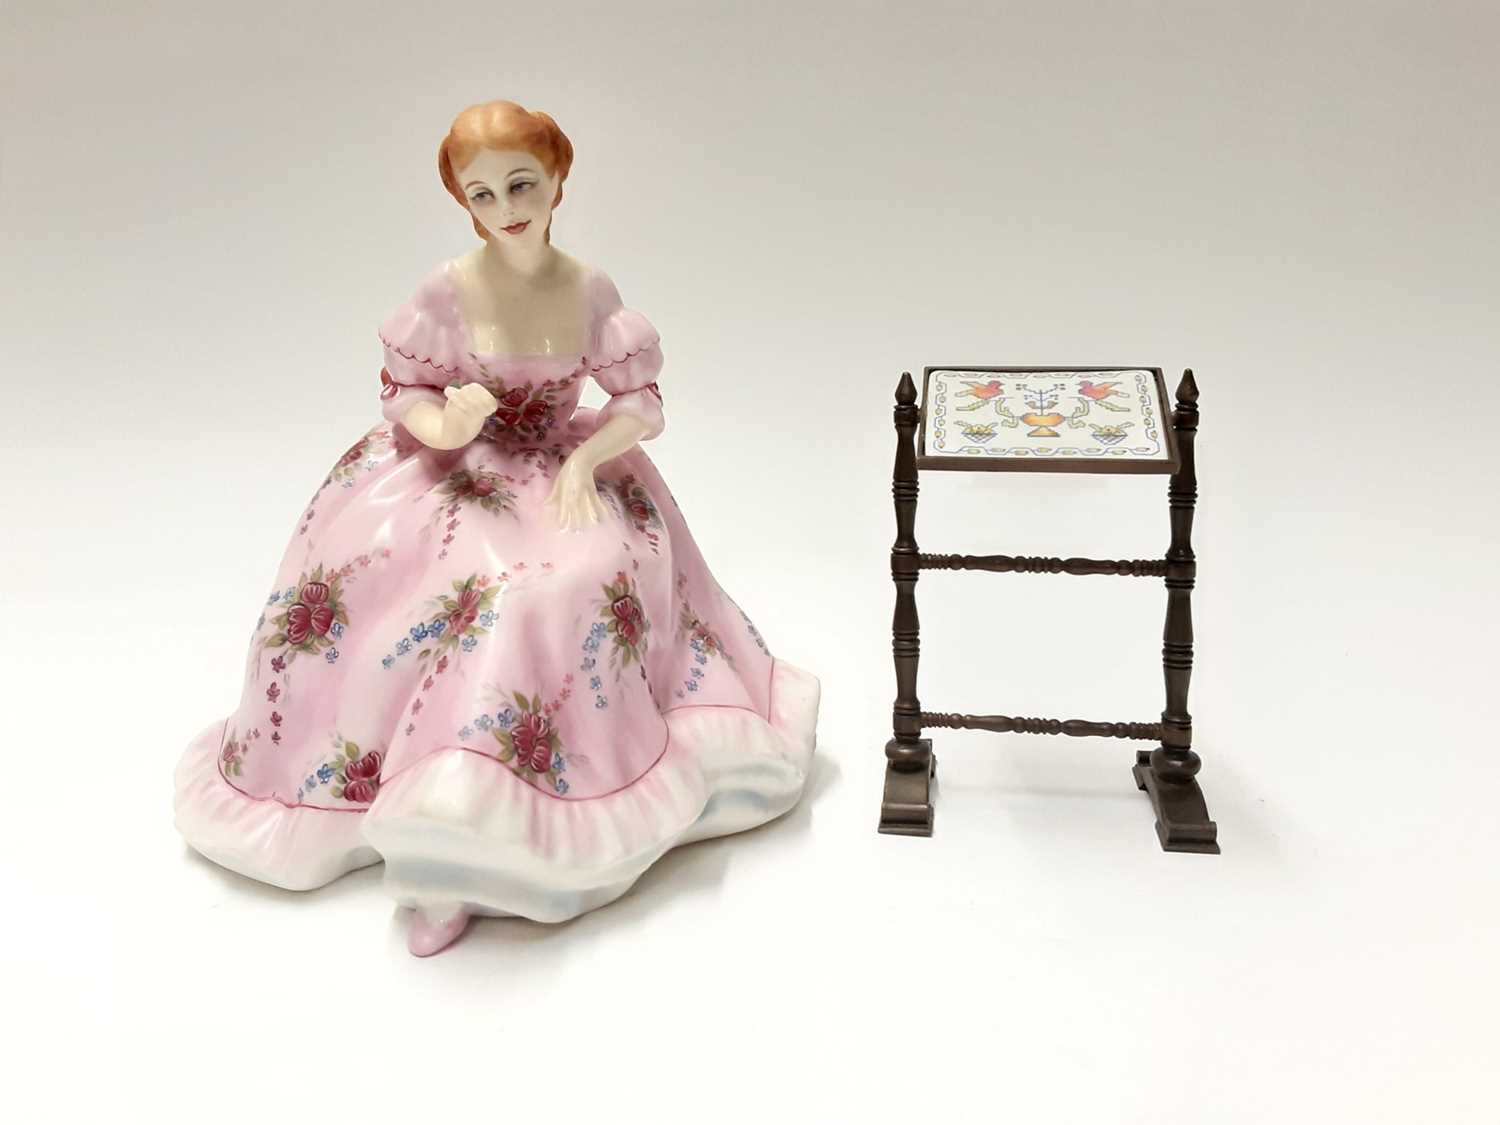 Lot 134 - Royal Doulton limited edition Gentle Arts figure - Tapestry Weaving HN3048 on plinth base, modelled by Pauline Parsons, number 429 of 750, boxed with certificate